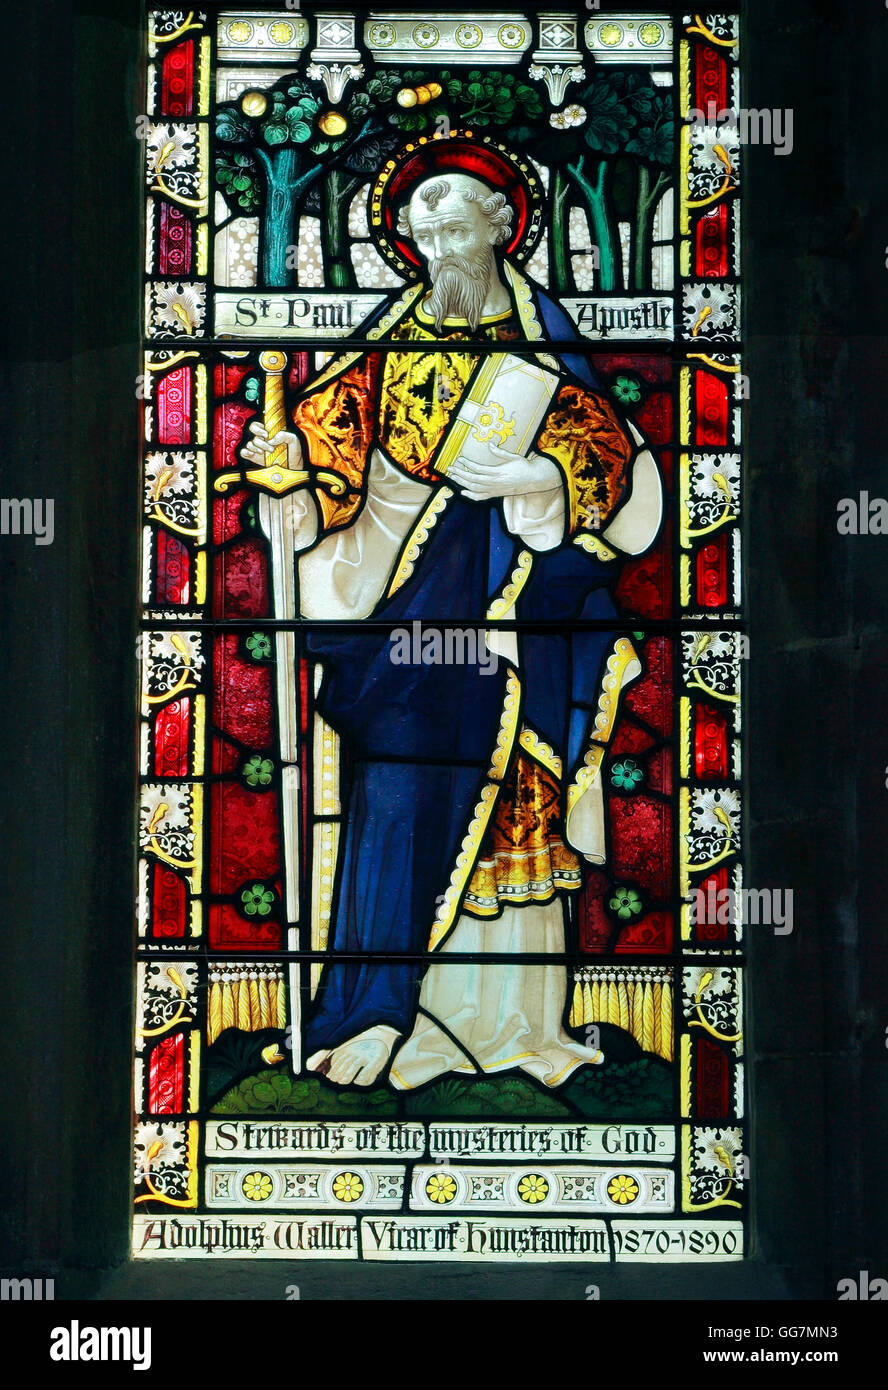 St. Paul, Apostle, Old Hunstanton stained glass window, by Clayton and Bell, c.1890, Norfolk England UK Saint Saints Stock Photo